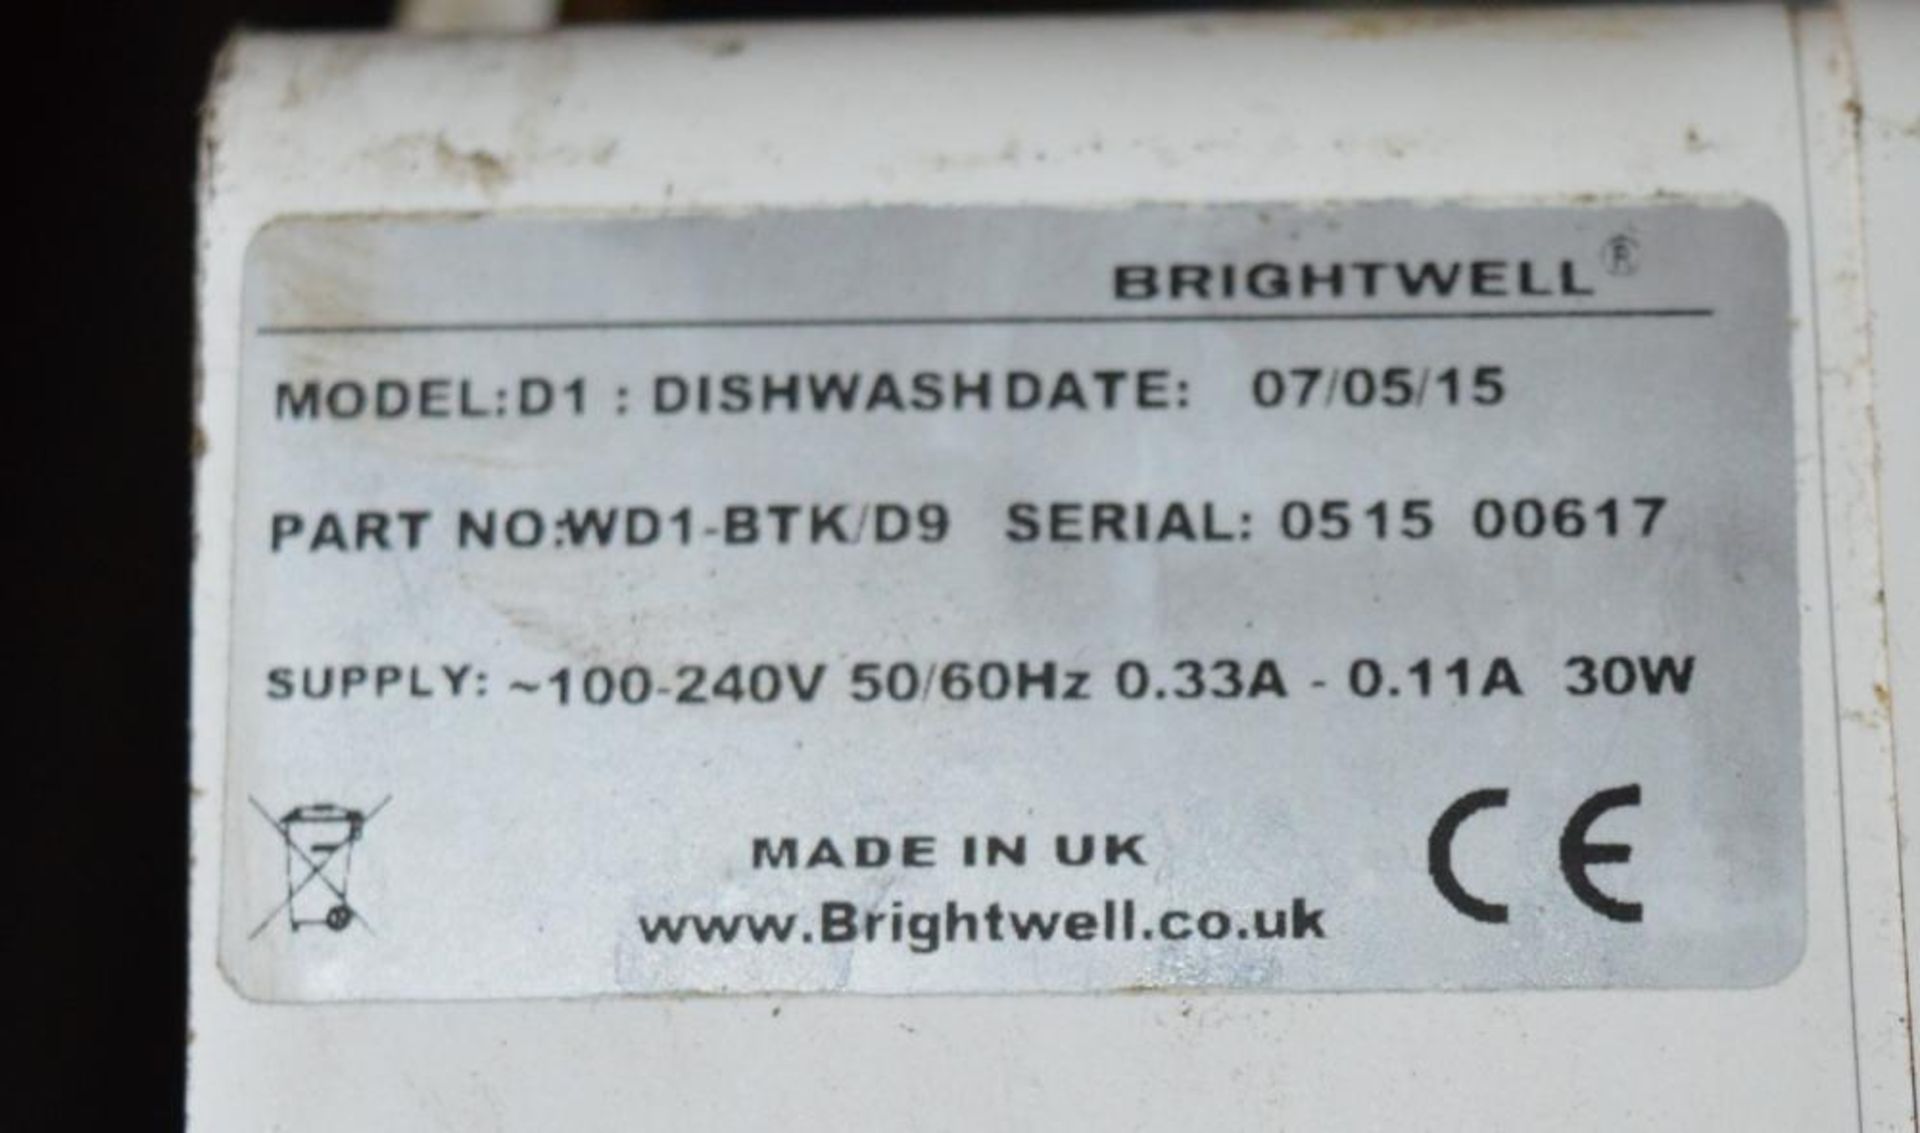 1 x Electrolux NHTG Stainless Steel Passthrough Dishwasher With Brightwell D1 Automatic Dosing Pump - Image 4 of 13